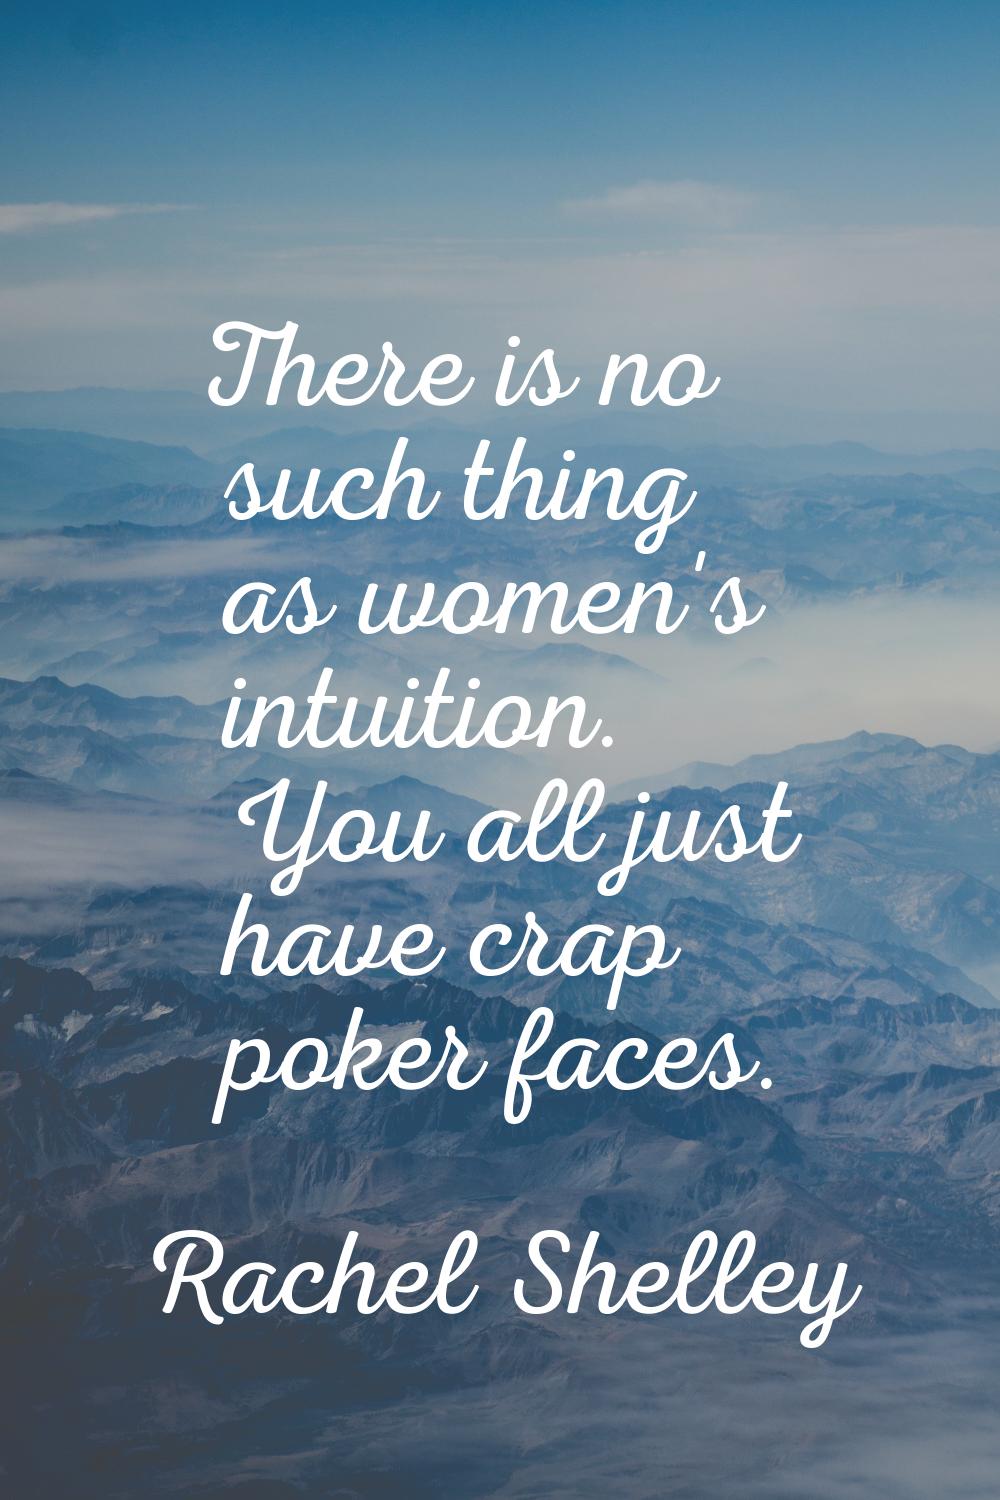 There is no such thing as women's intuition. You all just have crap poker faces.